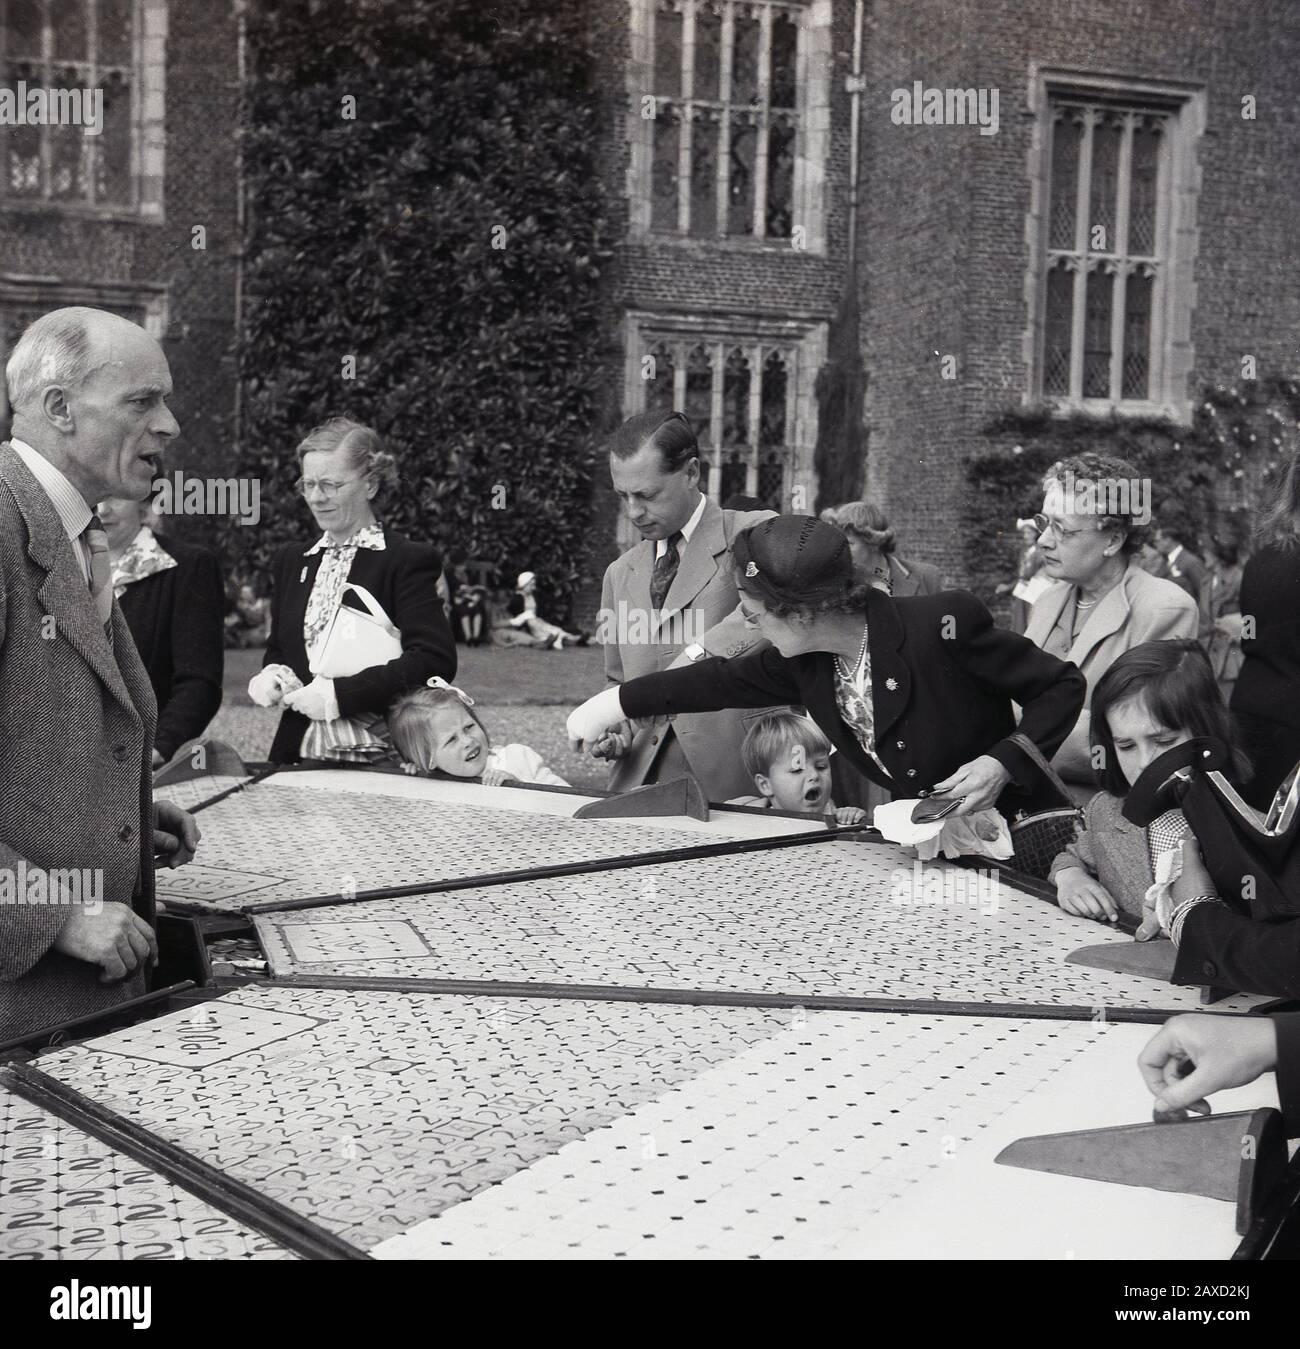 1950s, historical, in the grounds of a country house at a english summer garden party, well-dressed adults in the clothes of the day, with their children at a stall, playing a game of shove half penny or roll a penny, England, UK. A traditional game, often played in pubs and social clubs, it involves players pushing or rolling coins up a board. Stock Photo